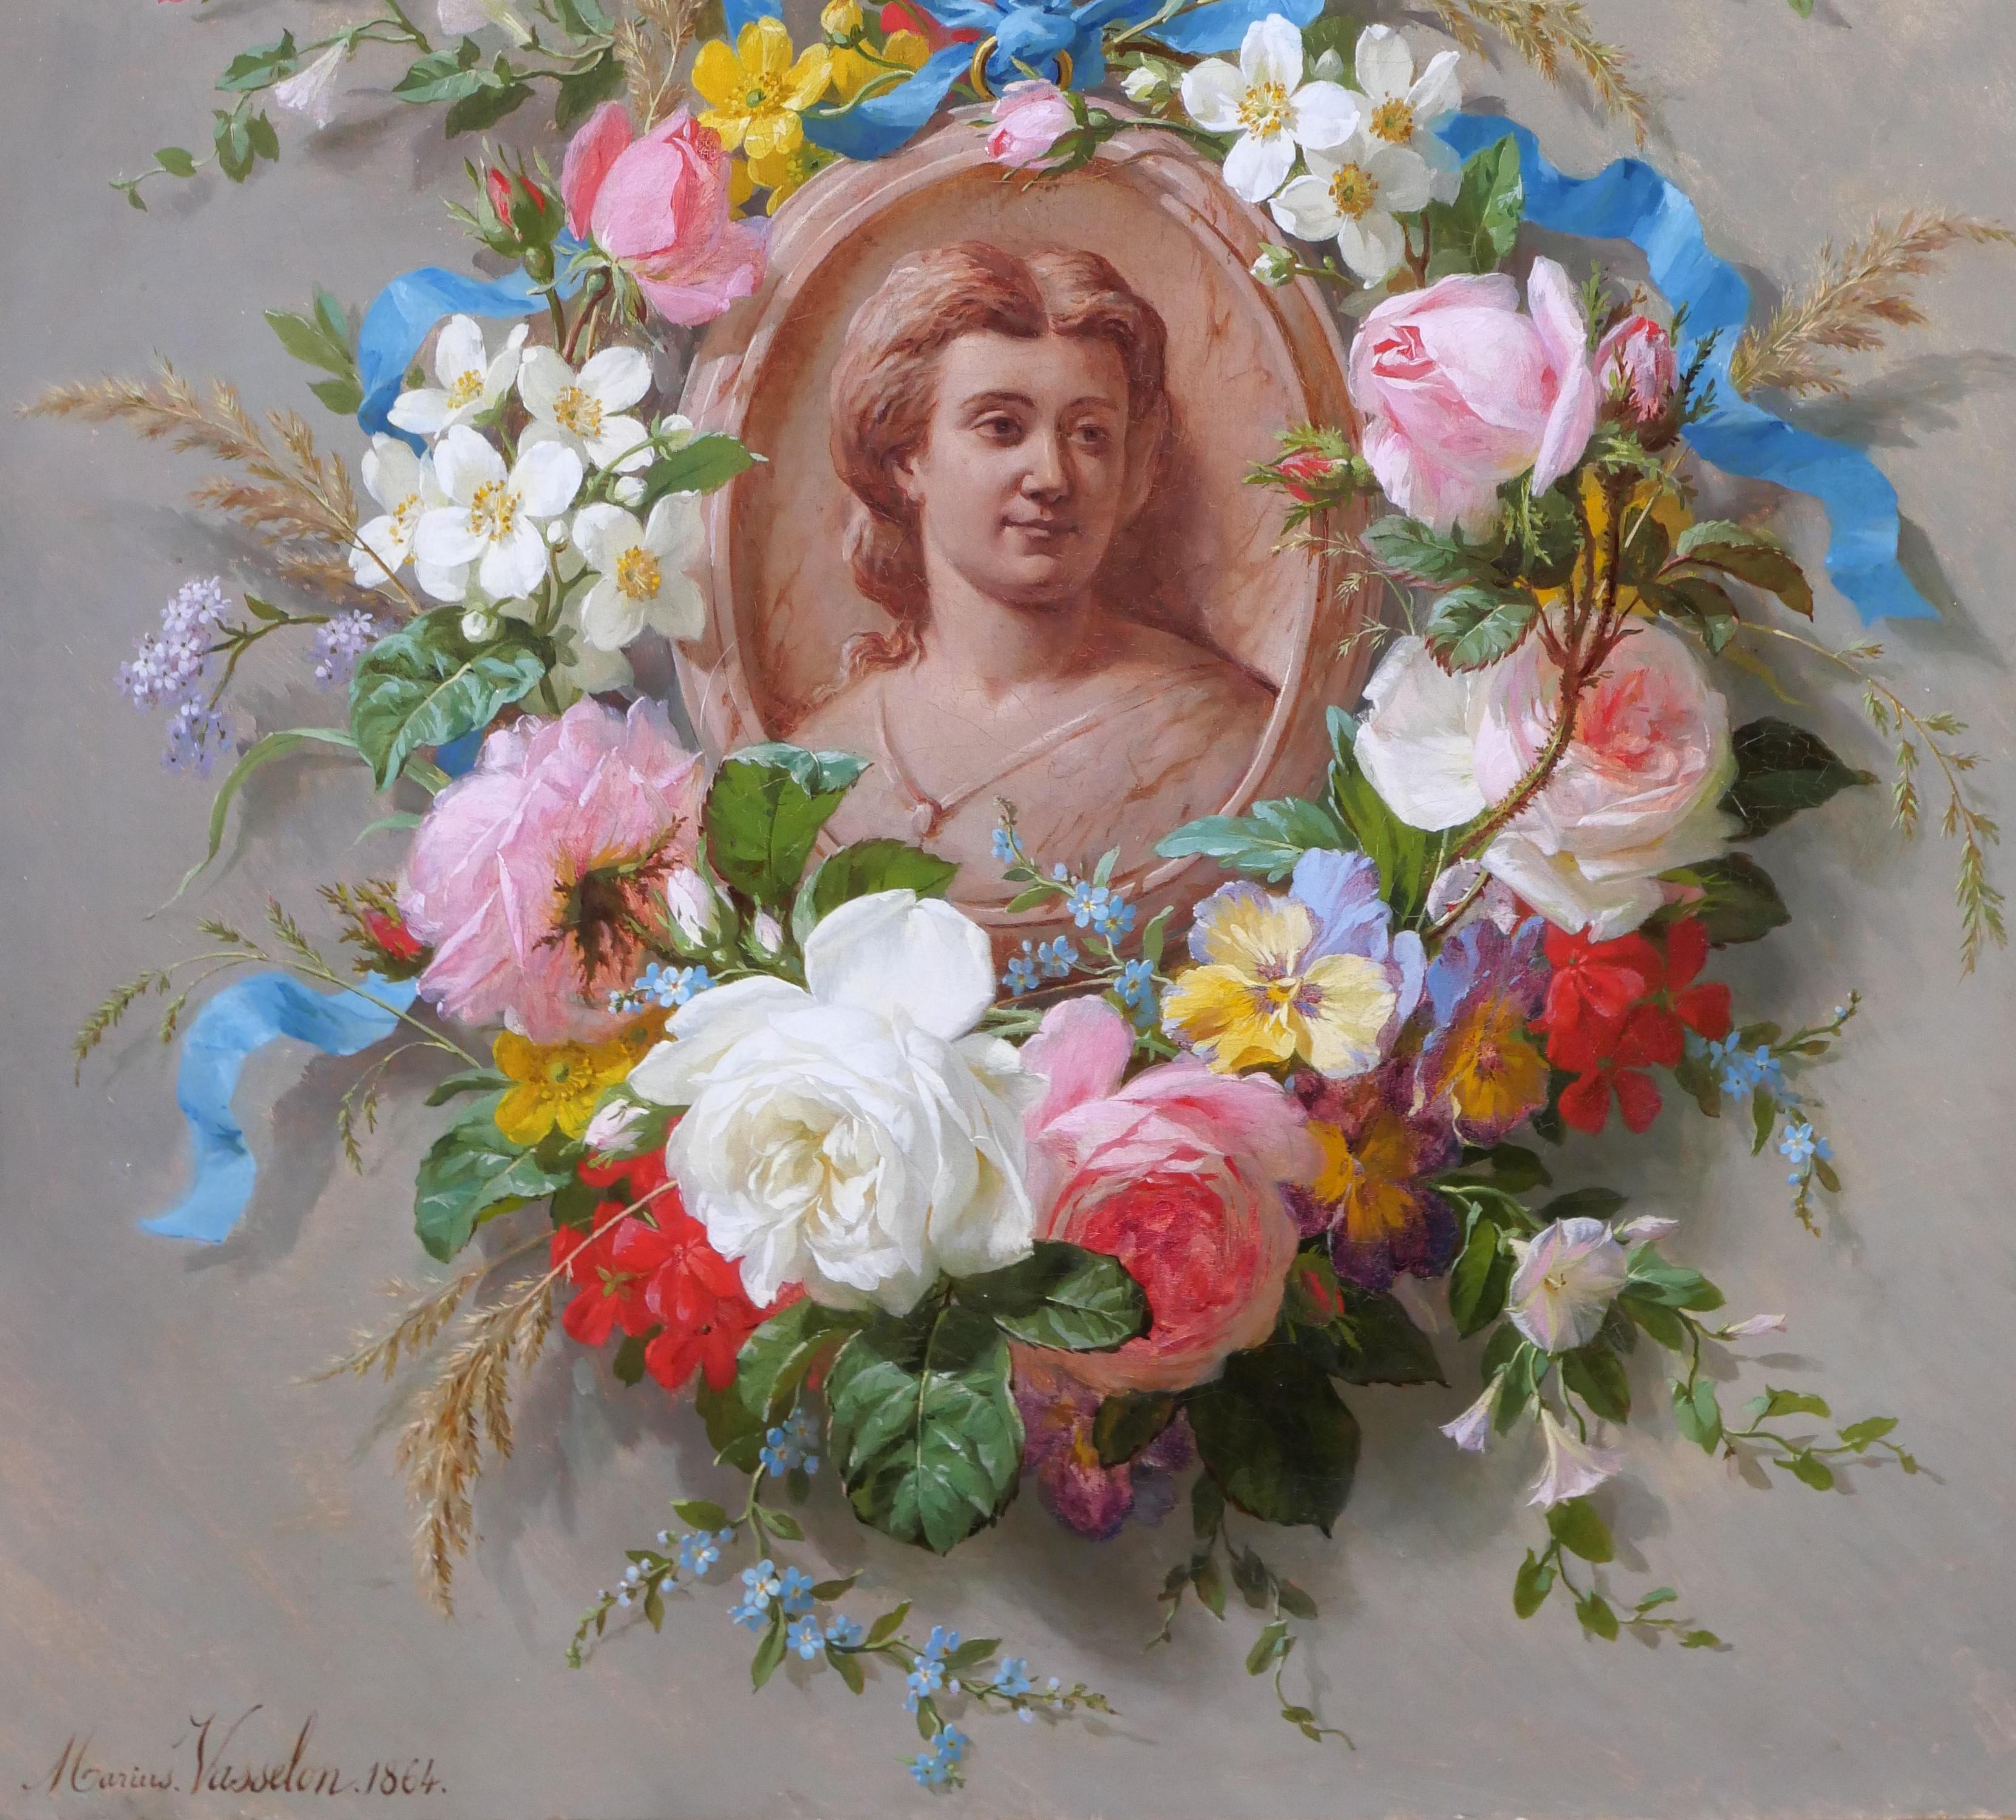 Marius VASSELON
Saint-Etienne, 1841 - Paris, 1924
Still life of summer flowers with portrait of a woman
Painting, oil on canvas
Signed and dated 1864 lower left
Painting: 50 x 60 cm (19.7 x 23.6 inches)
Beautiful original frame: 67 x 78 cm (26.4 x